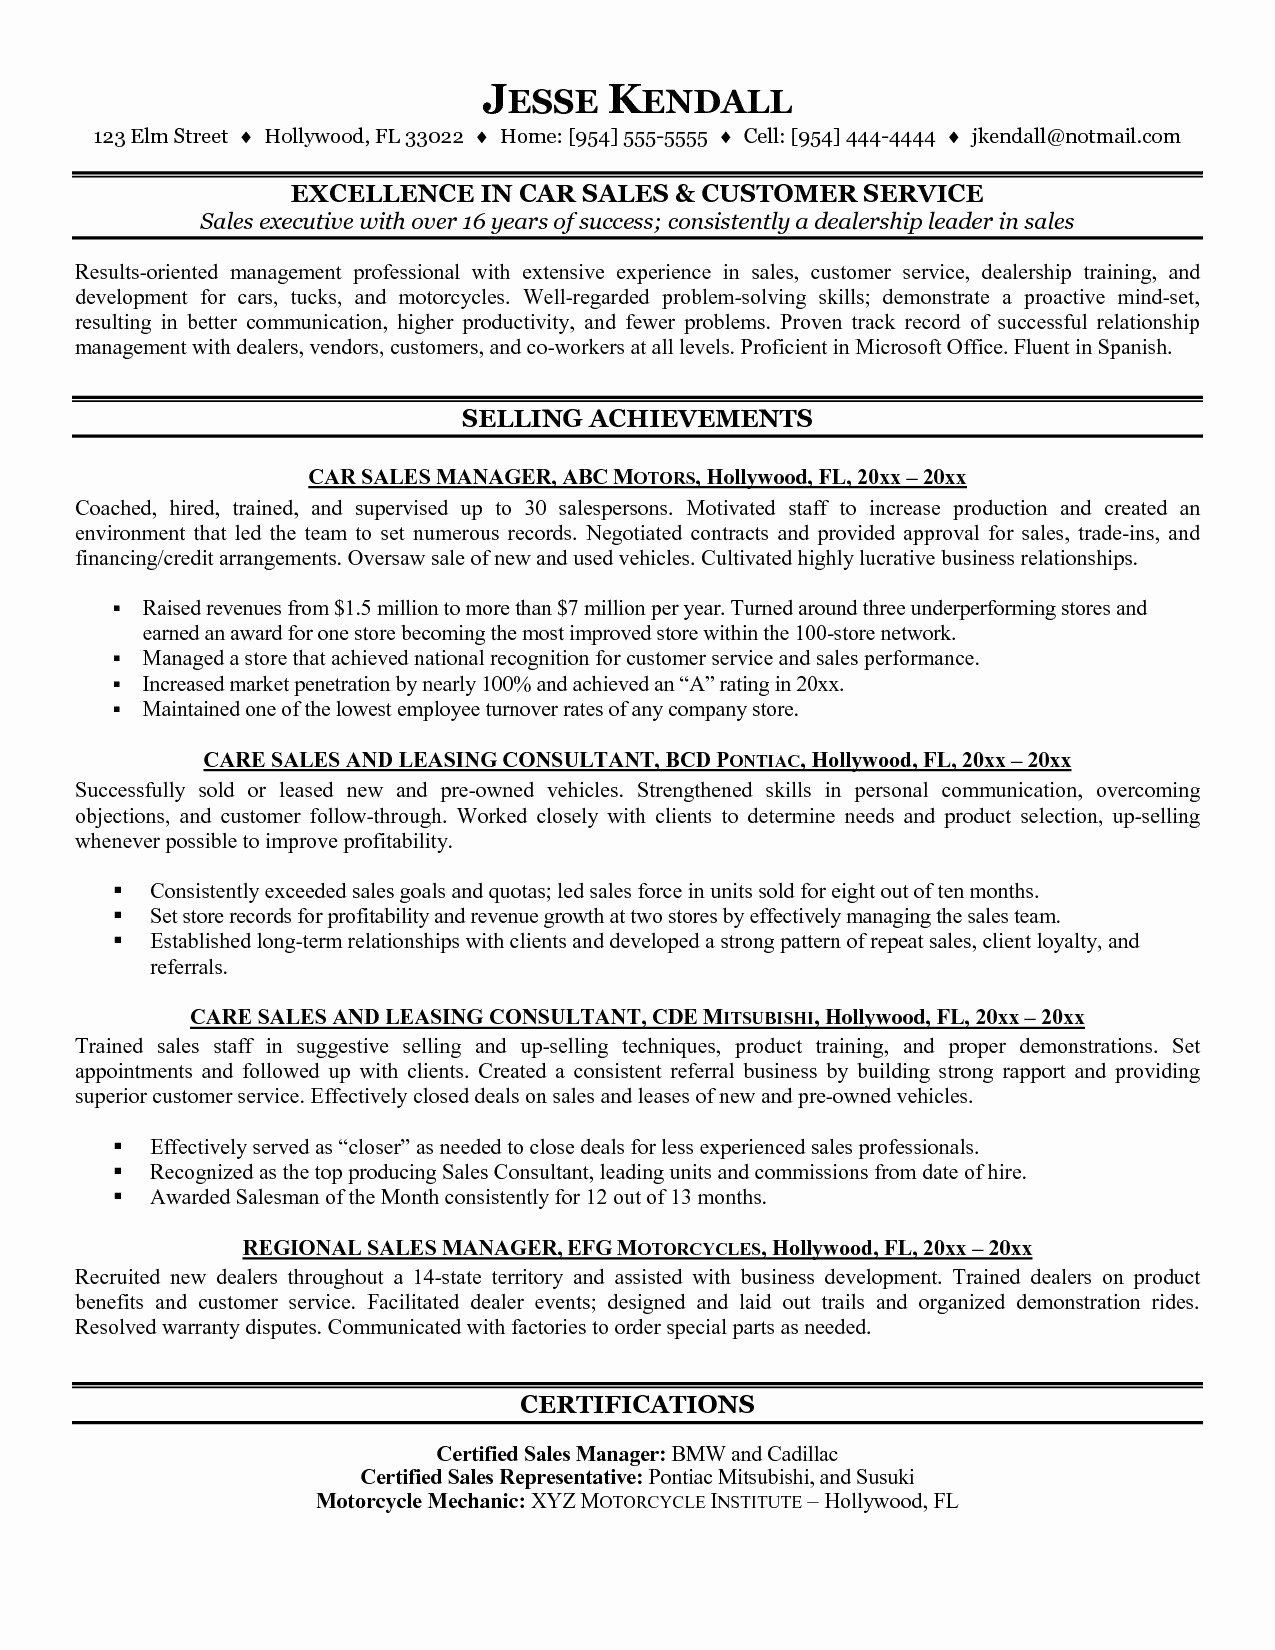 Resume Sample Goal for Auto Parts Sales Person Automobile Sales Manager Resume Unique 9 10 Resume Objective …